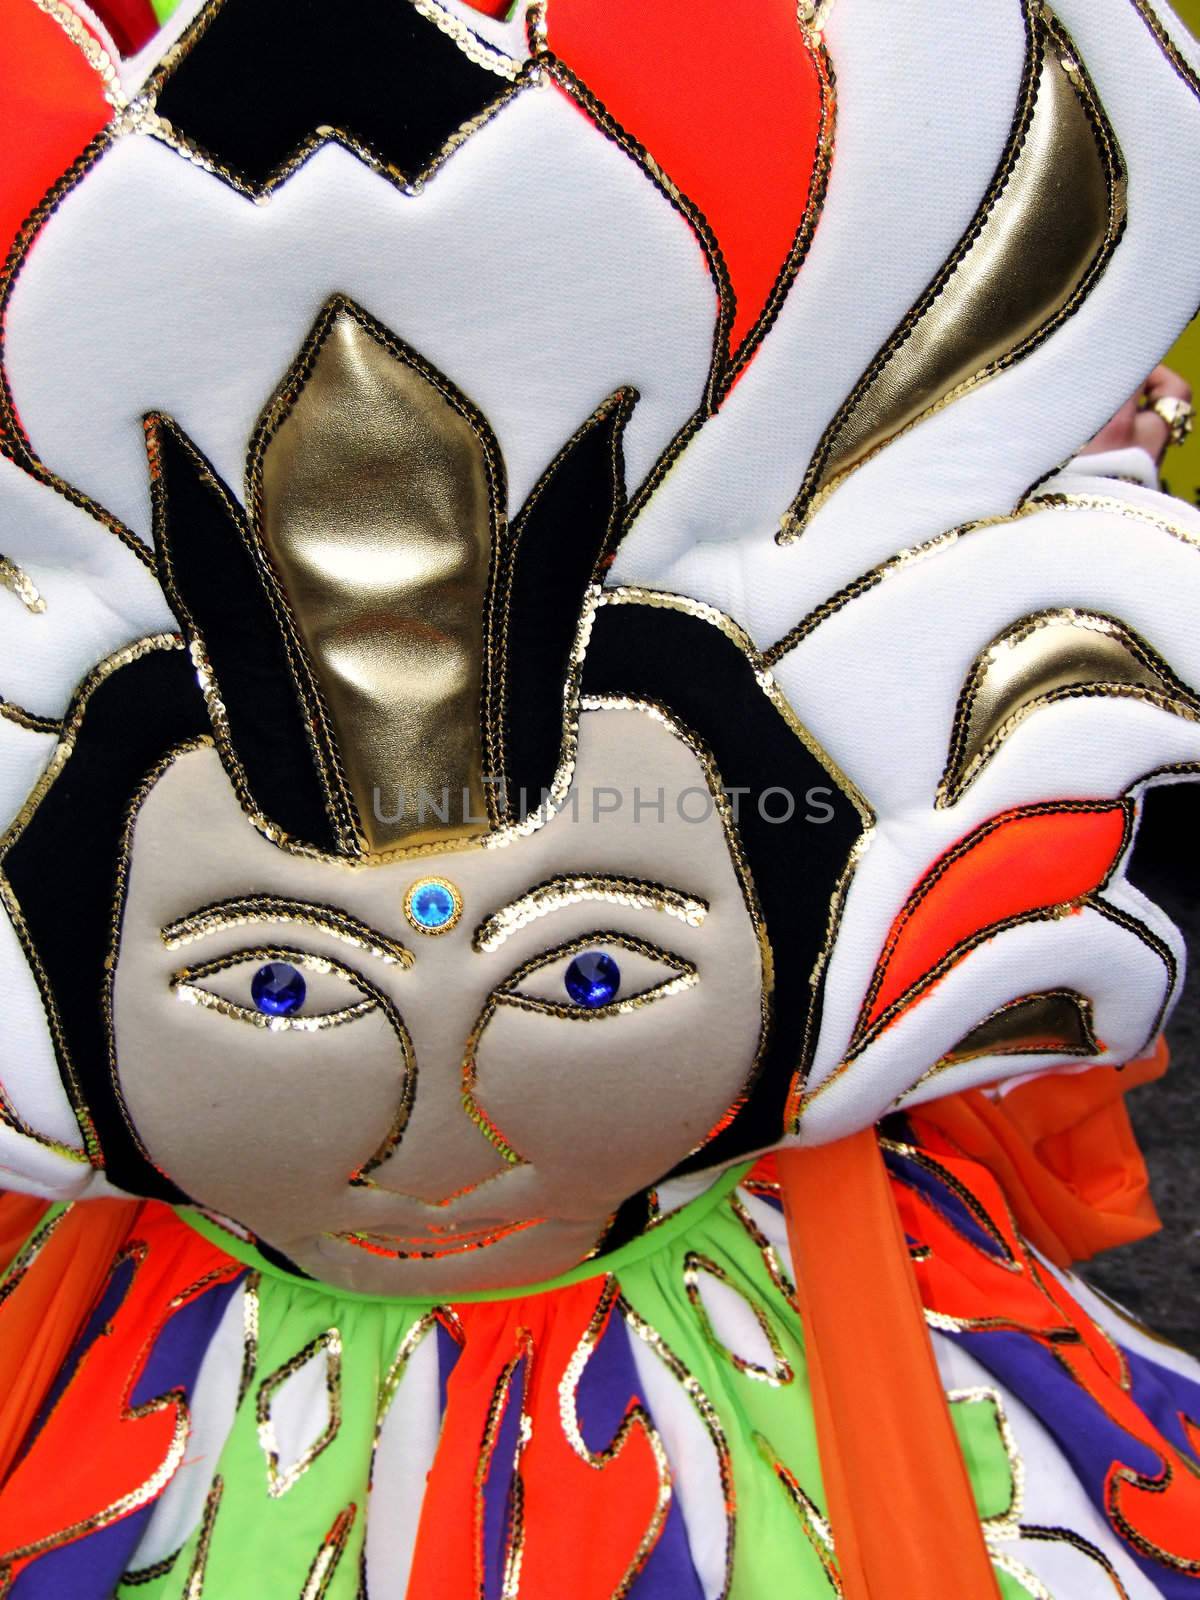 Carnival Series - Images depicting the mood, spirit, and festivities at the International Malta Carnival 2007 - Editorial Images